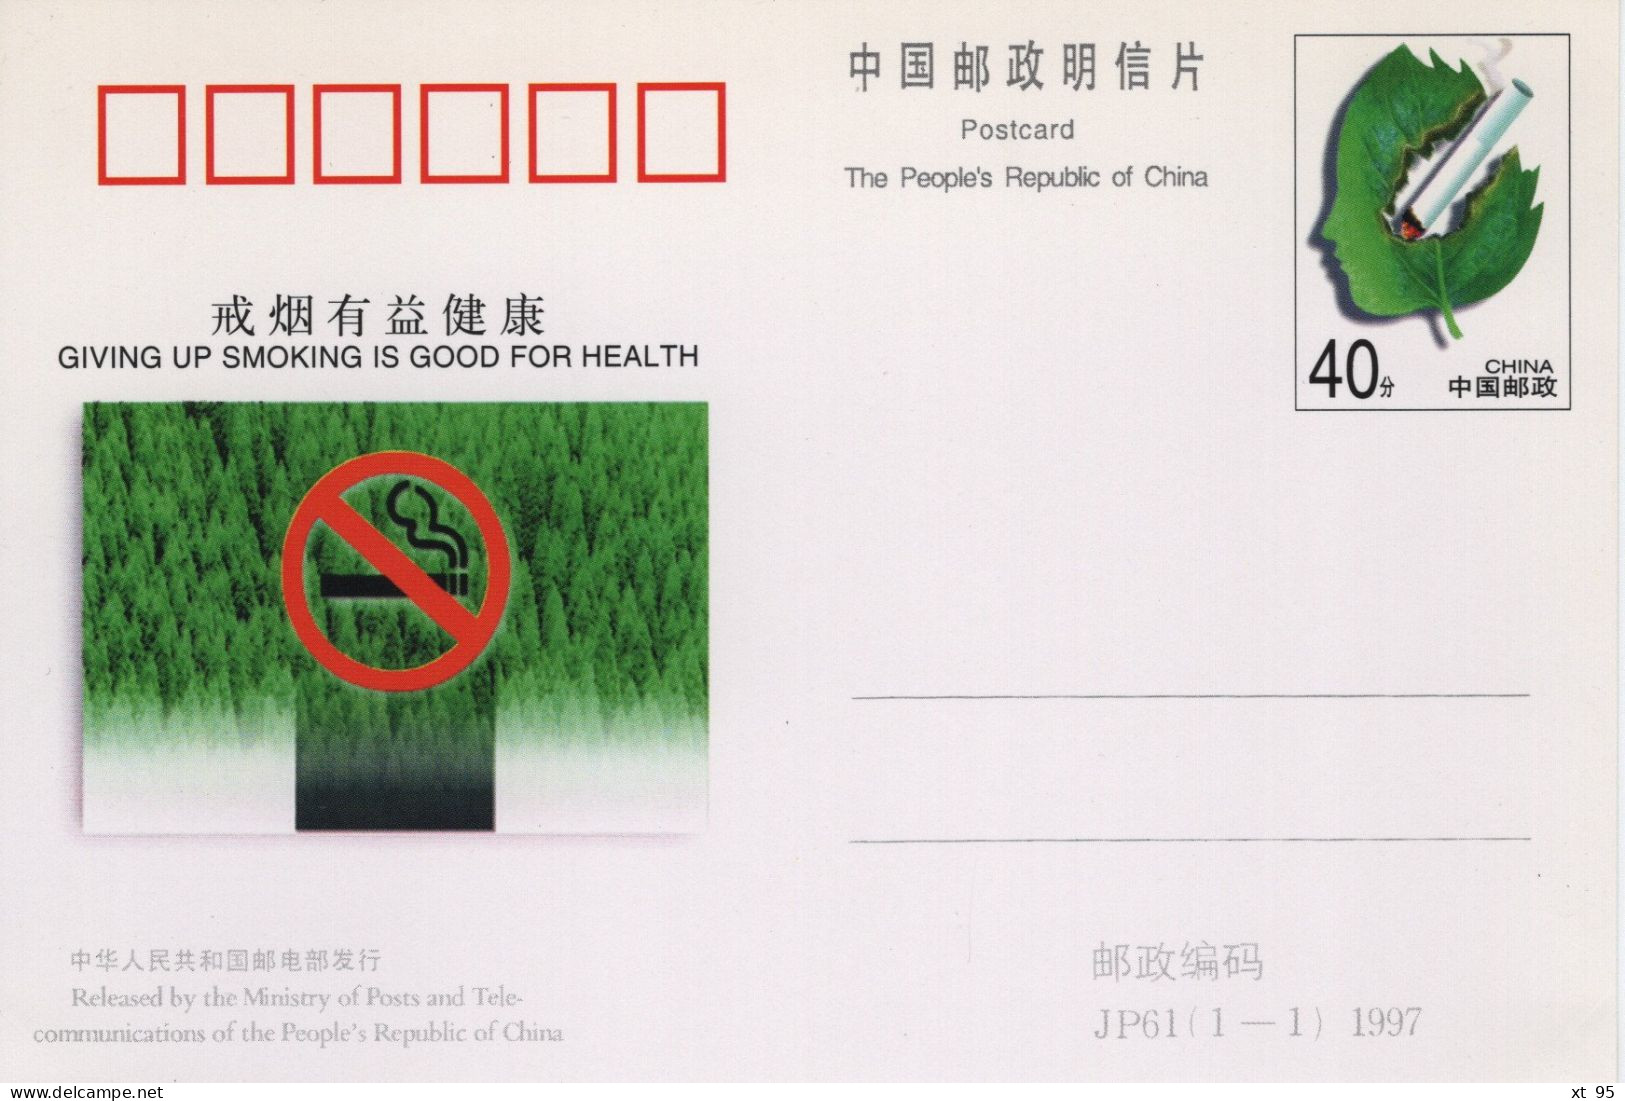 Chine - 1997 - Entier Postal JP61 - Giving Up Smoking - Postcards